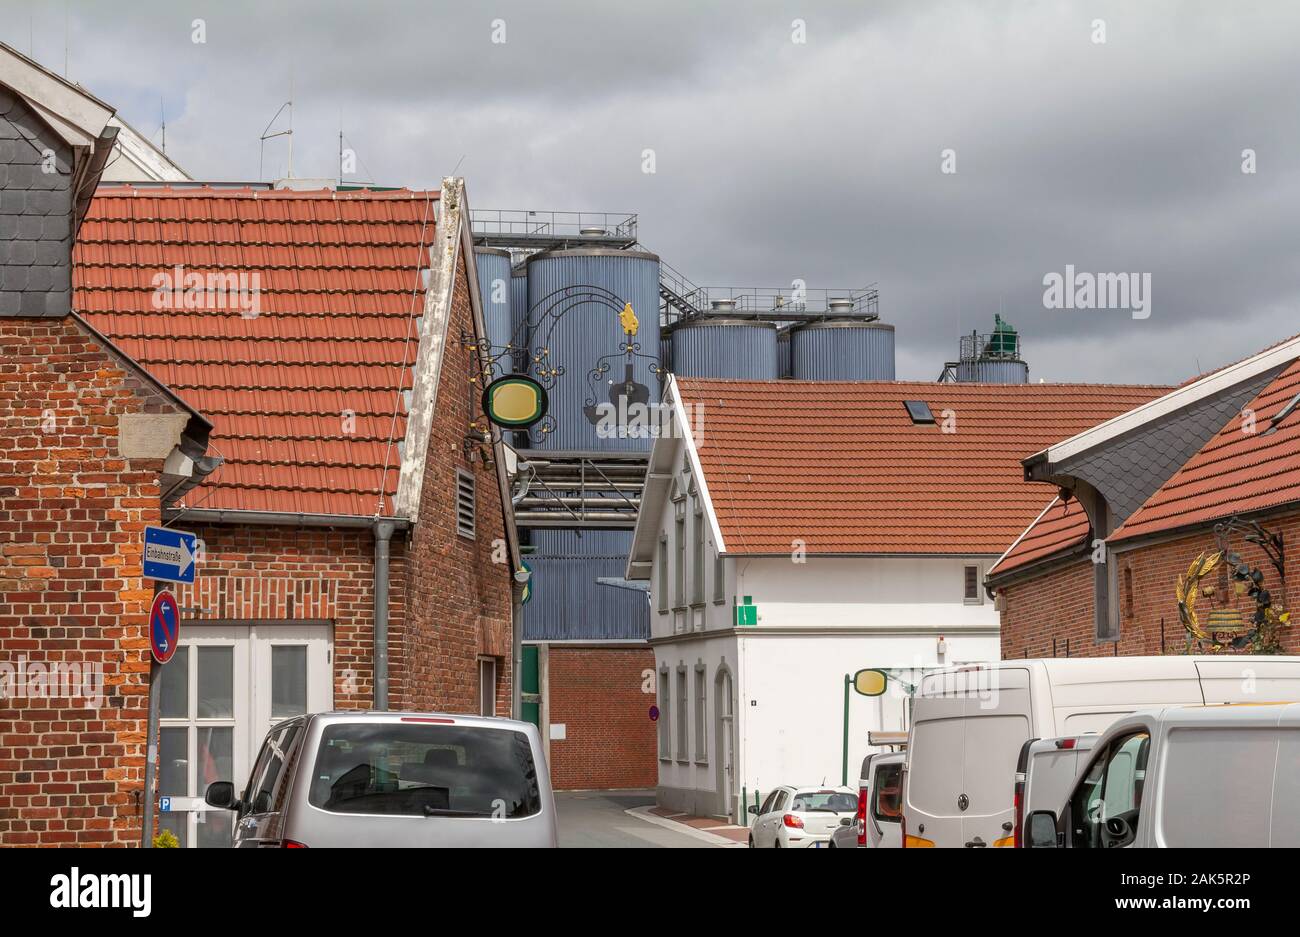 architectural impression seen at a city named Jever which is located in East Frisia in Northern Germany Stock Photo